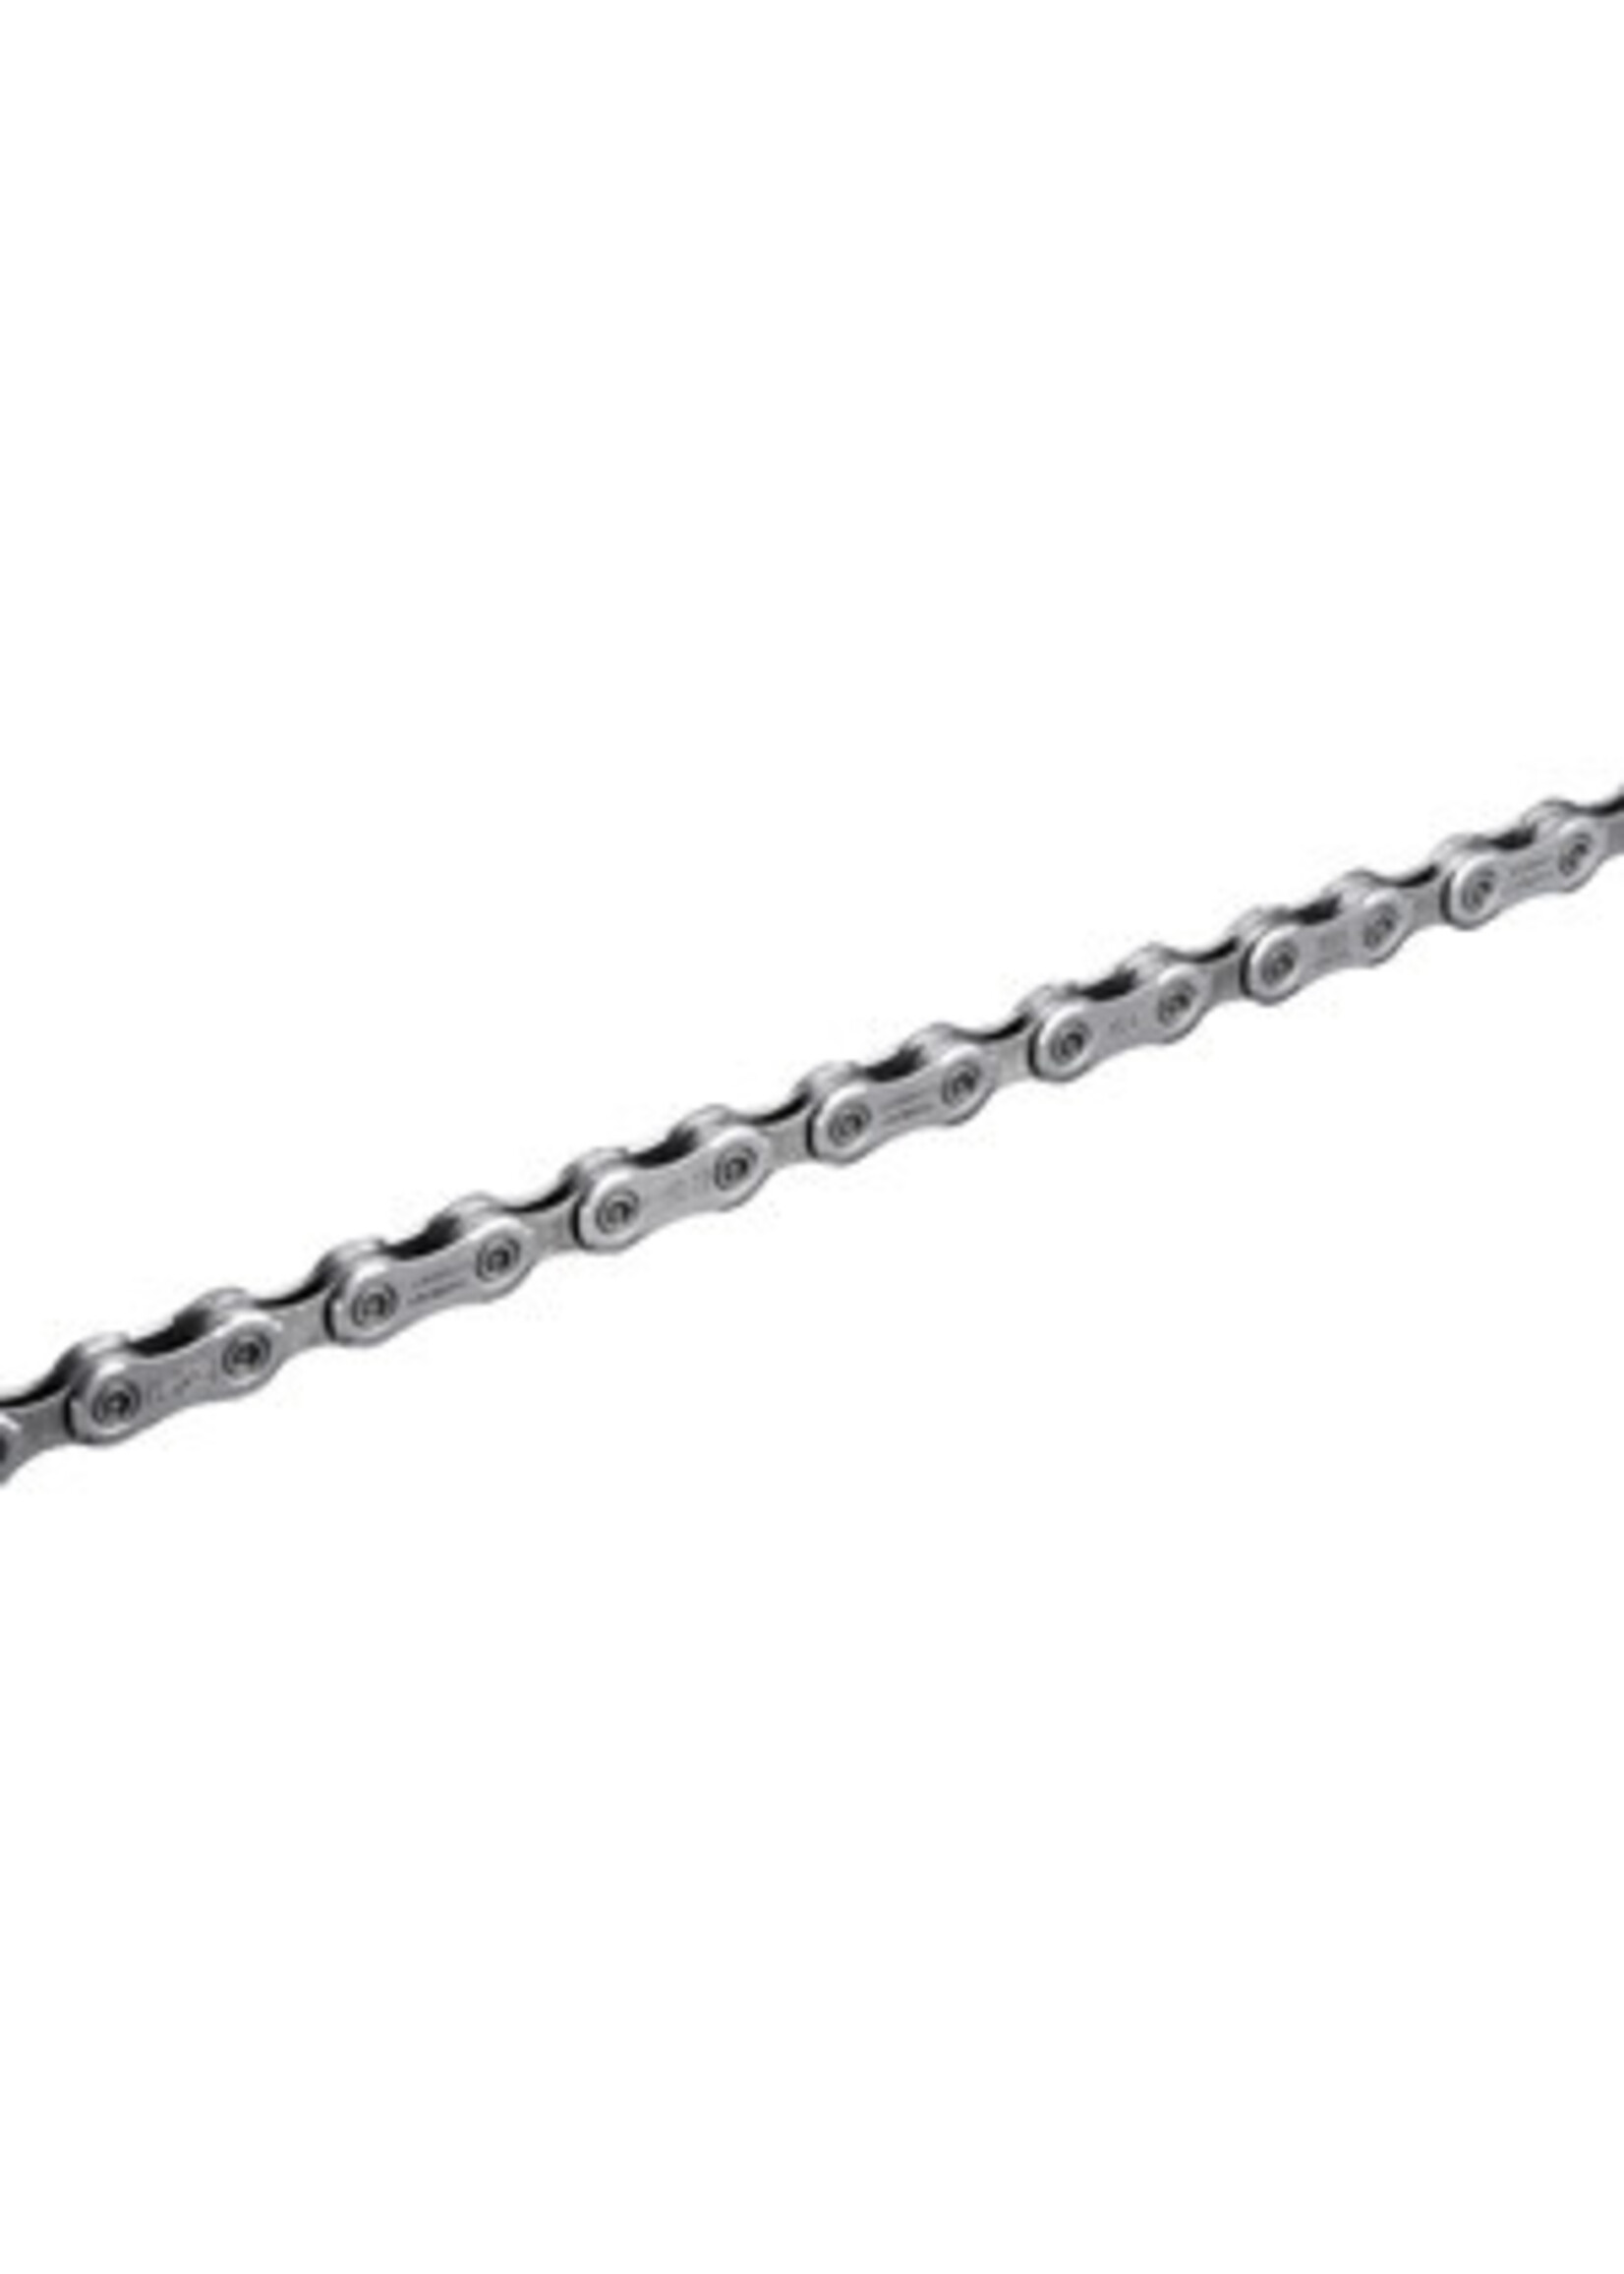 Shimano Shimano CN-M8100 XT chain with quick link, 12-speed, 126L